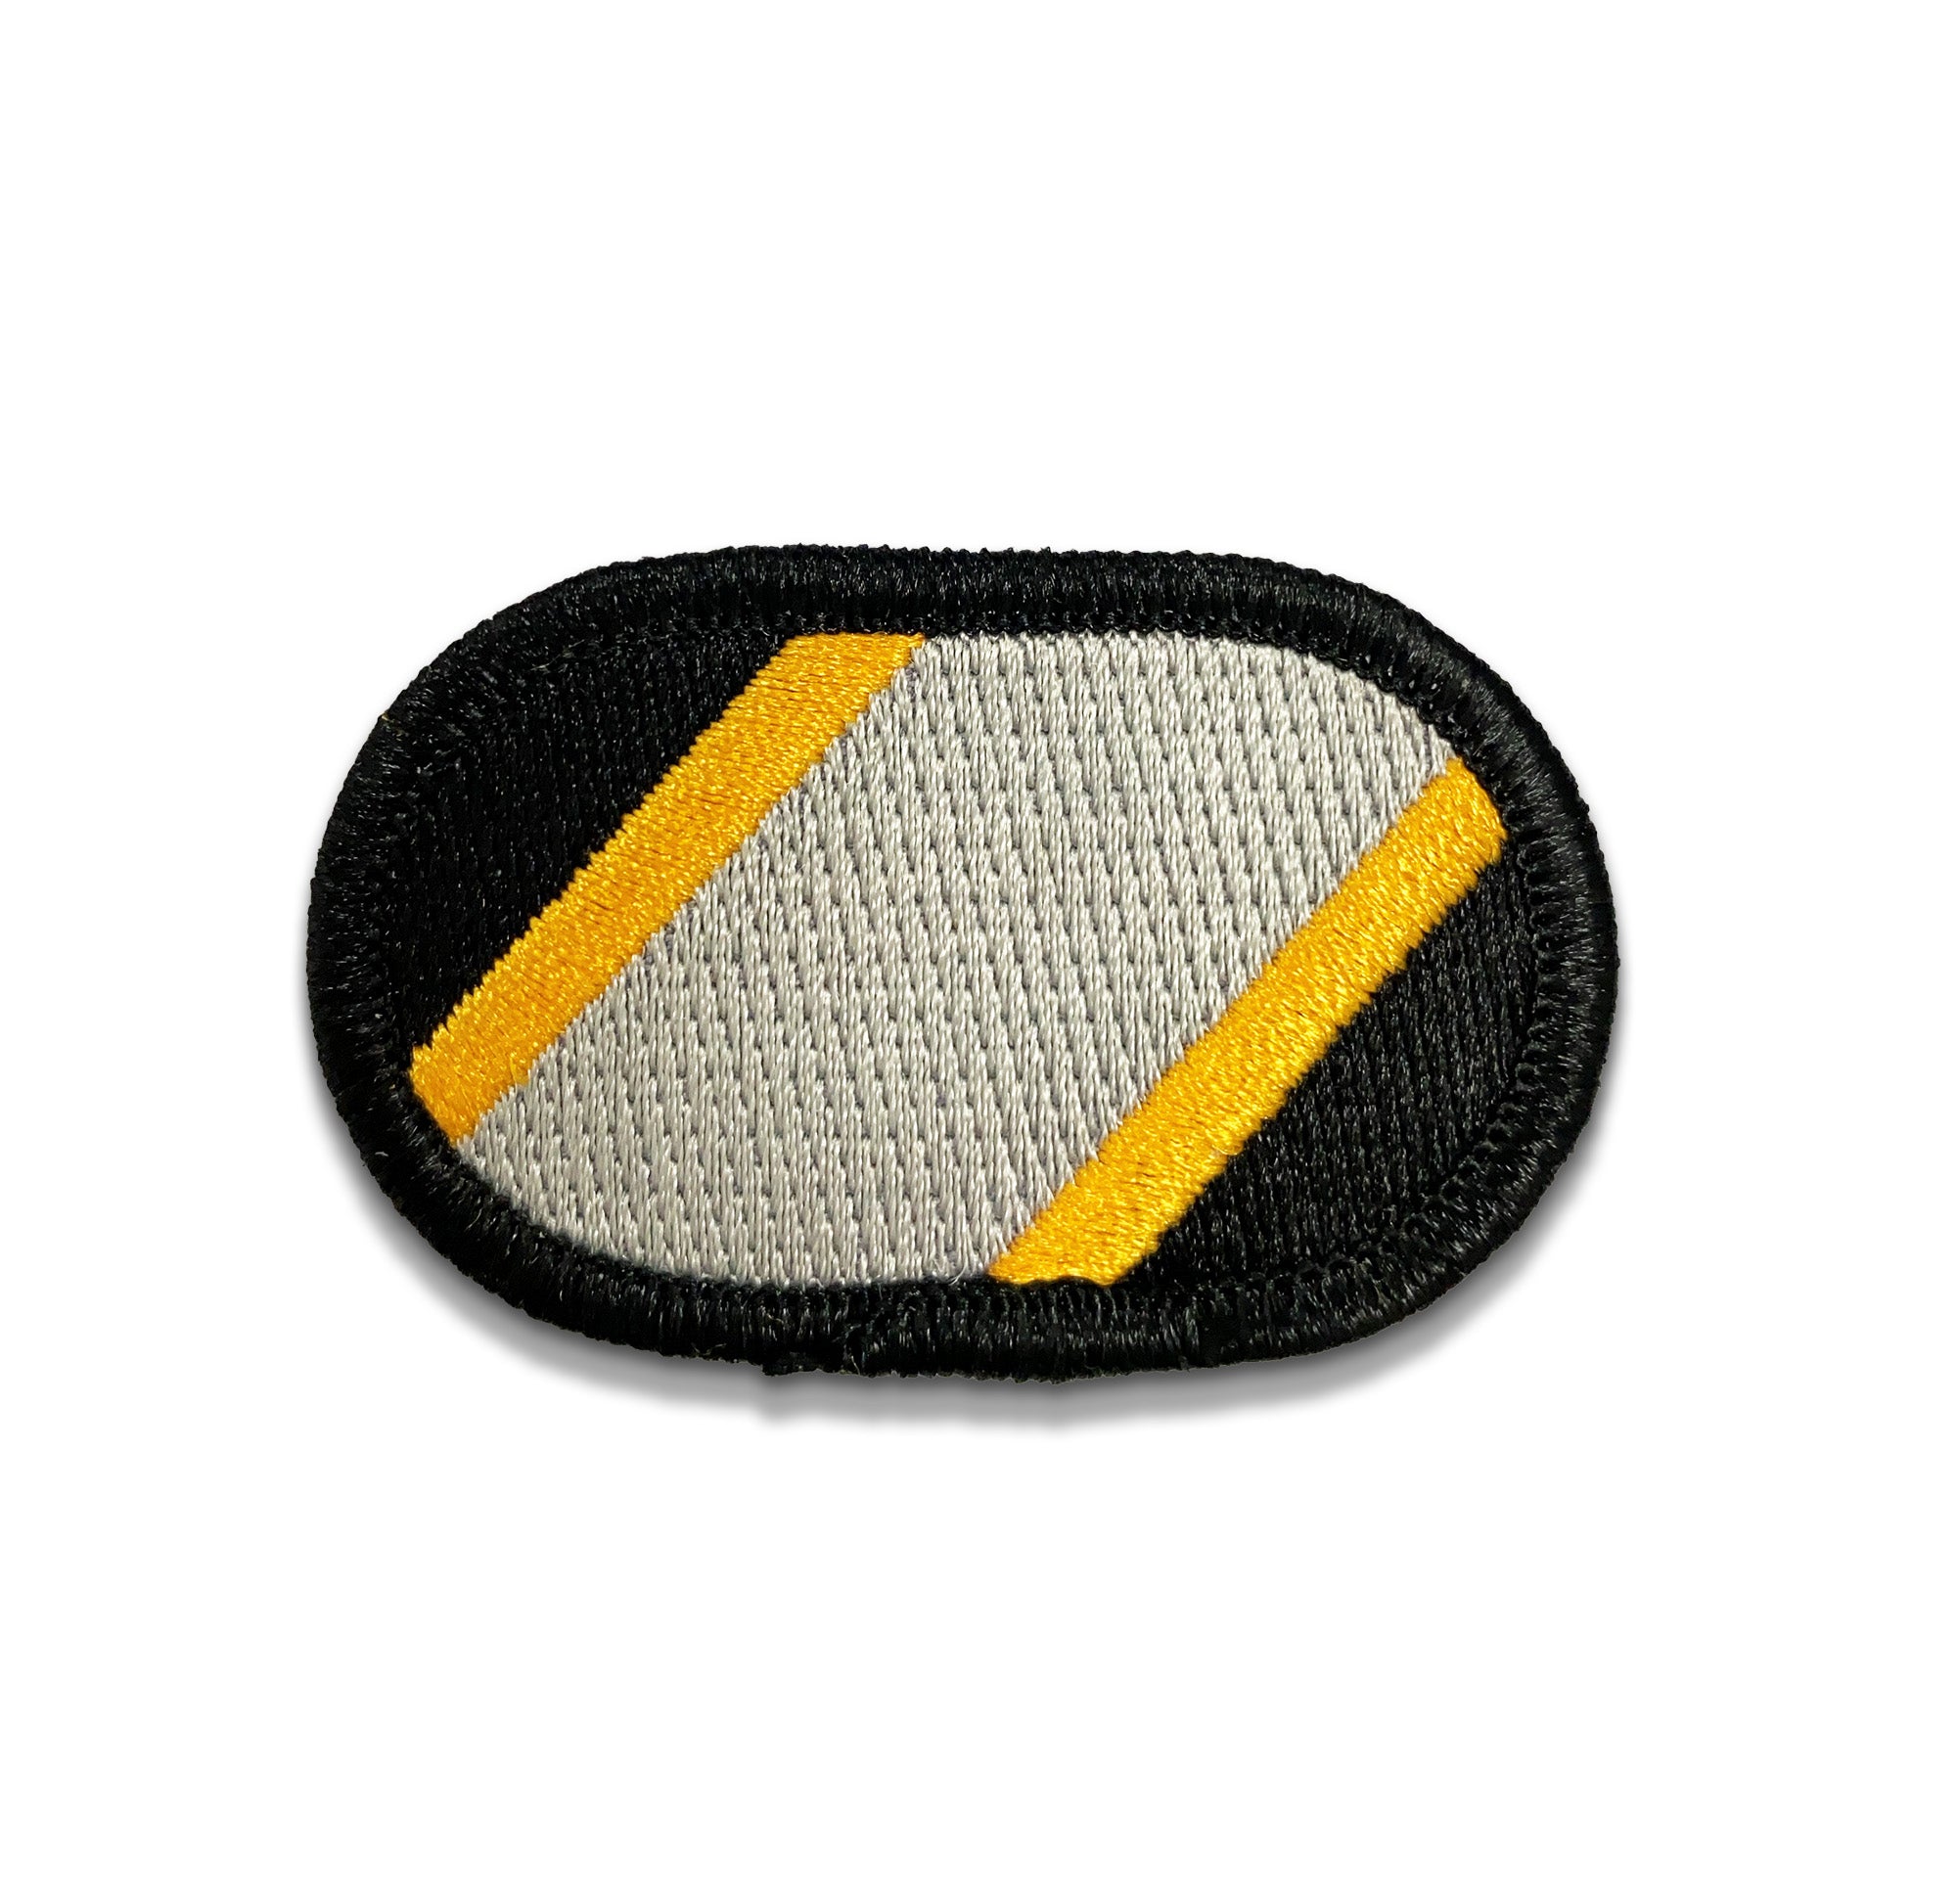 Joint Special Operations Command Oval